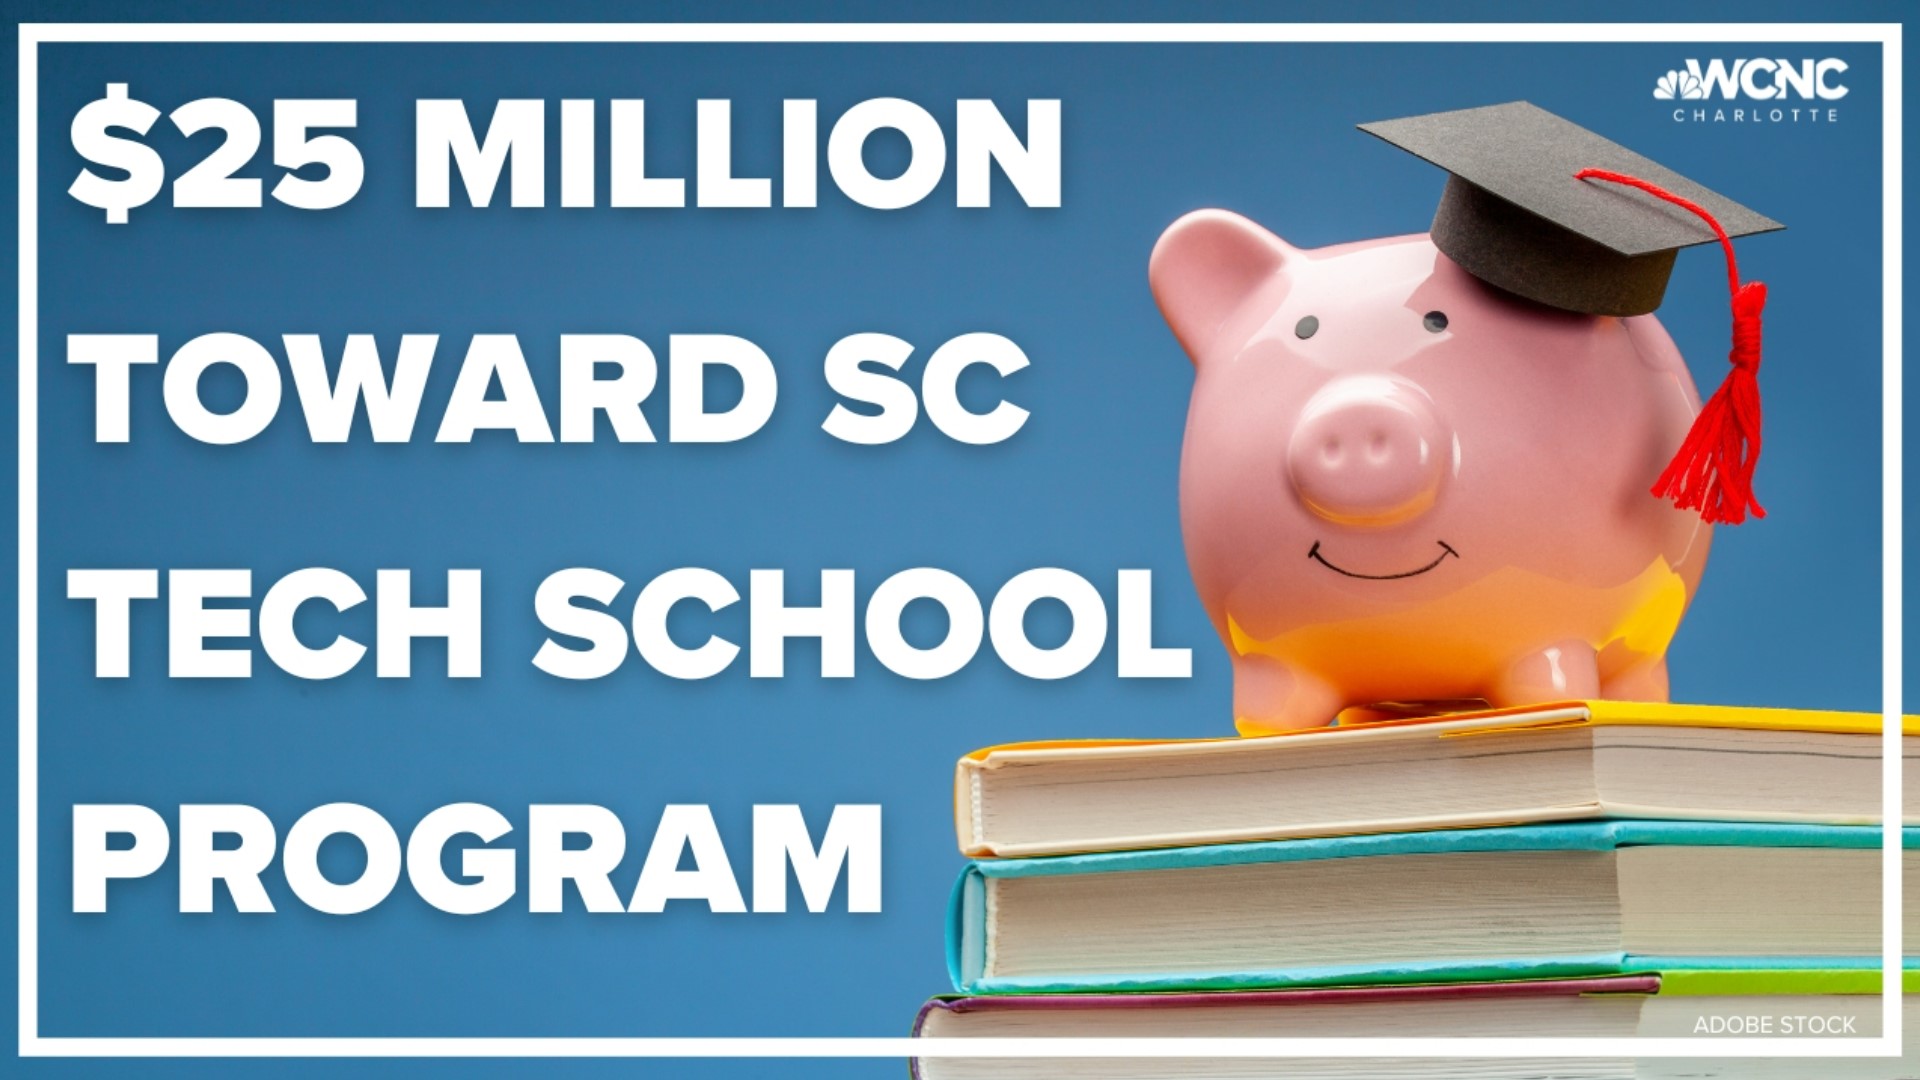 Workforce Scholarships for the Future will provide scholarships to cover costs and tuition to SC tech colleges